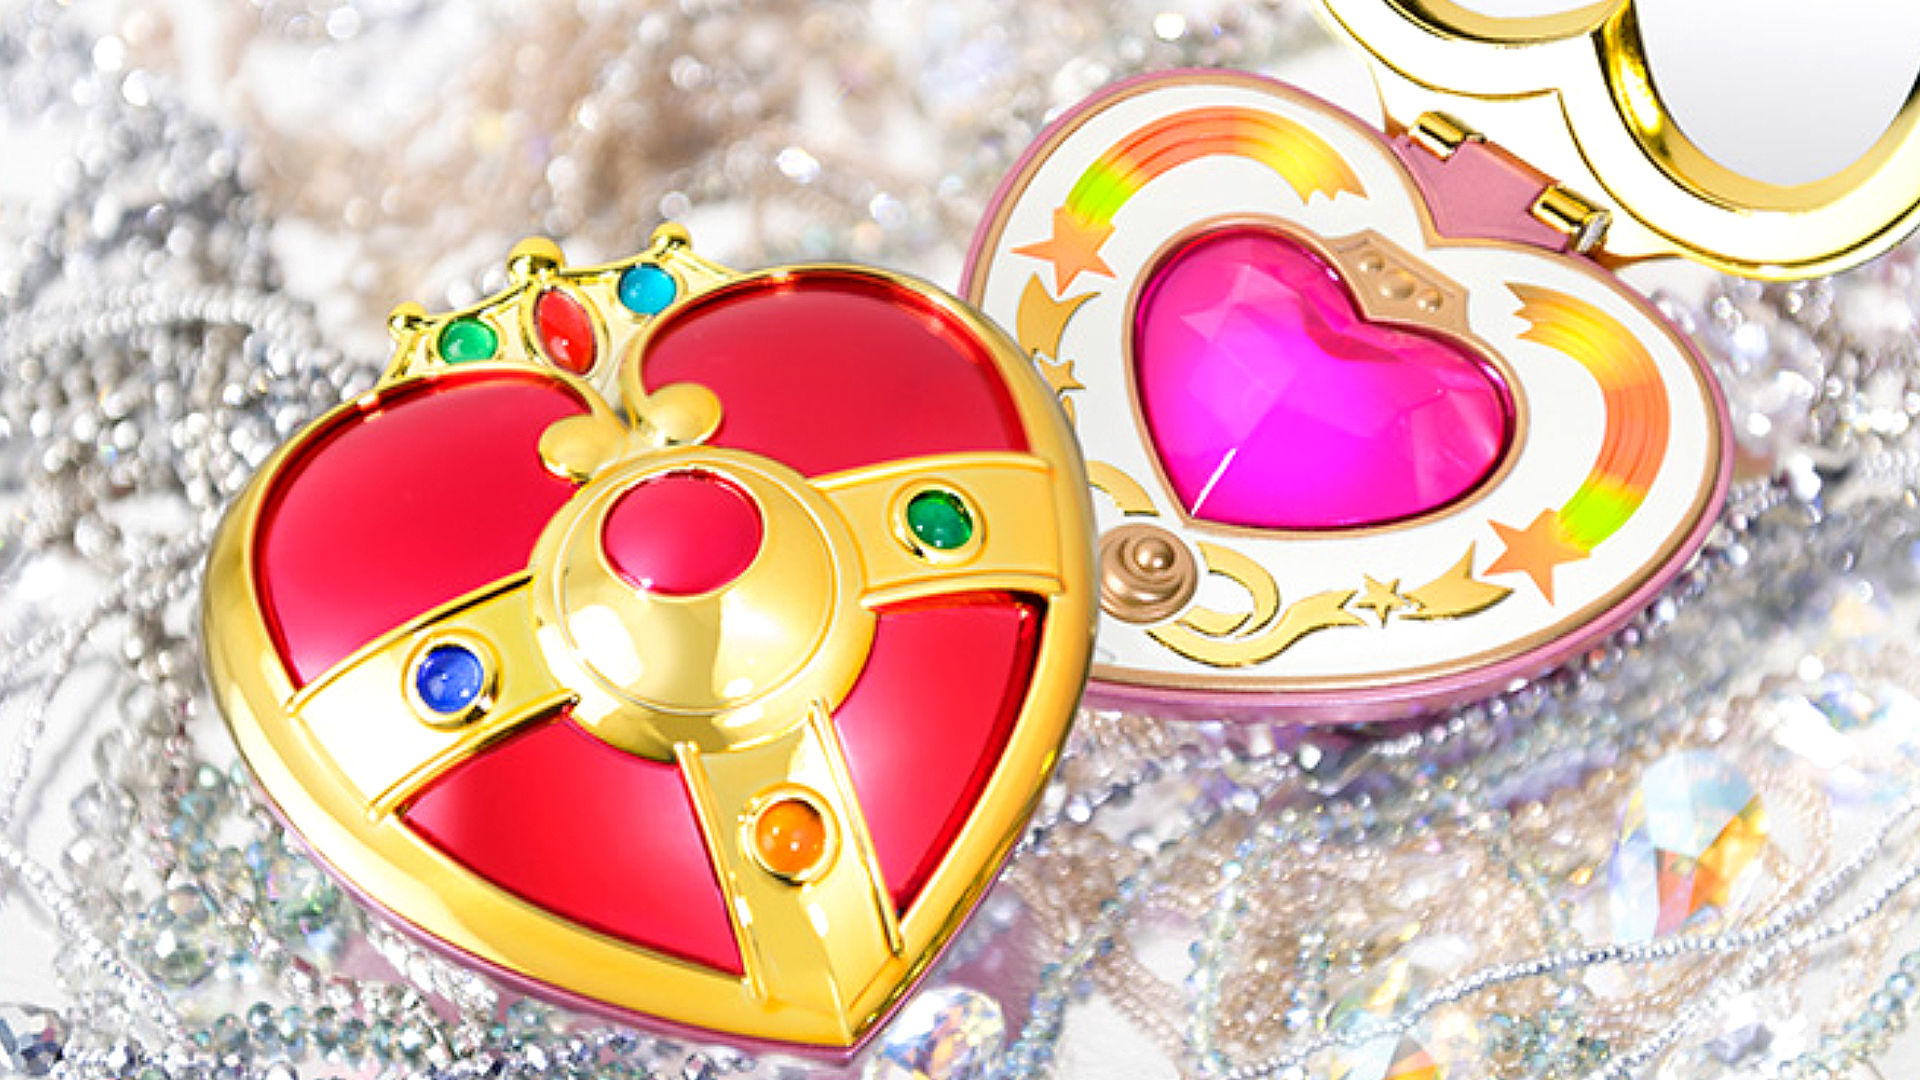 Two Sailor Moon Cosmic Heart Compact Proplica transformation brooches with one open and one closed.